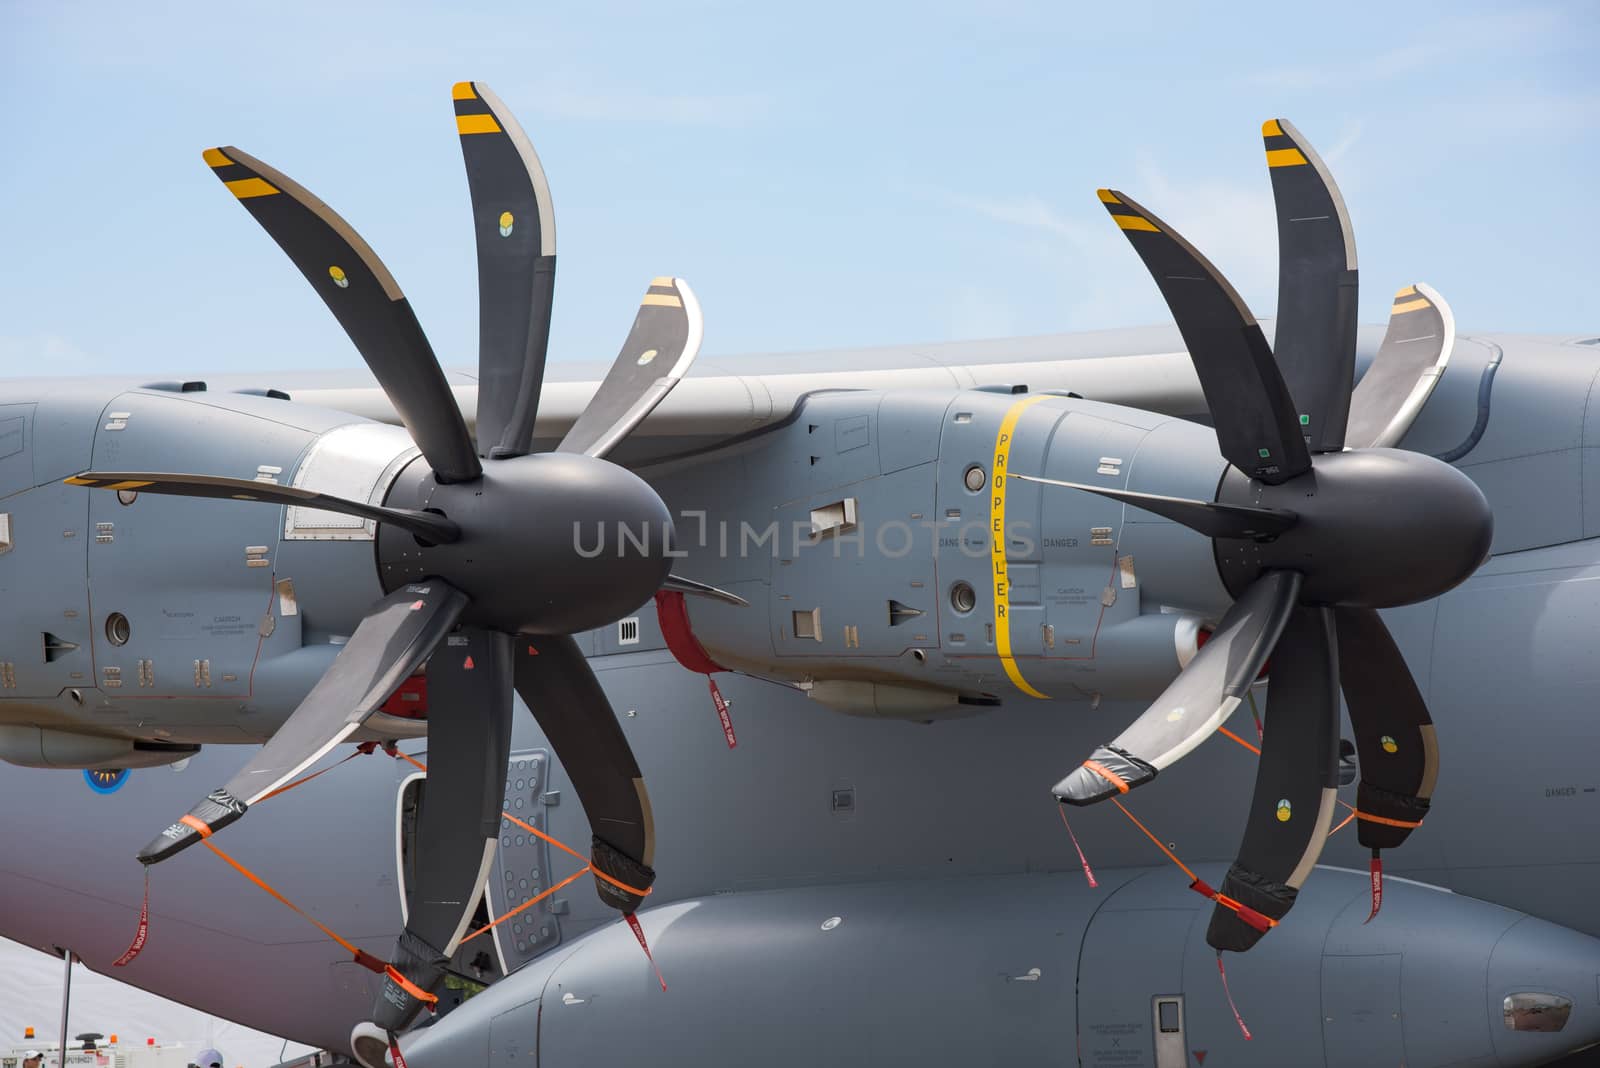 Singapore - February 17, 2016: Engines and propellers of an Airbus A400M on display during Singapore Airshow at Changi Exhibition Centre in Singapore.